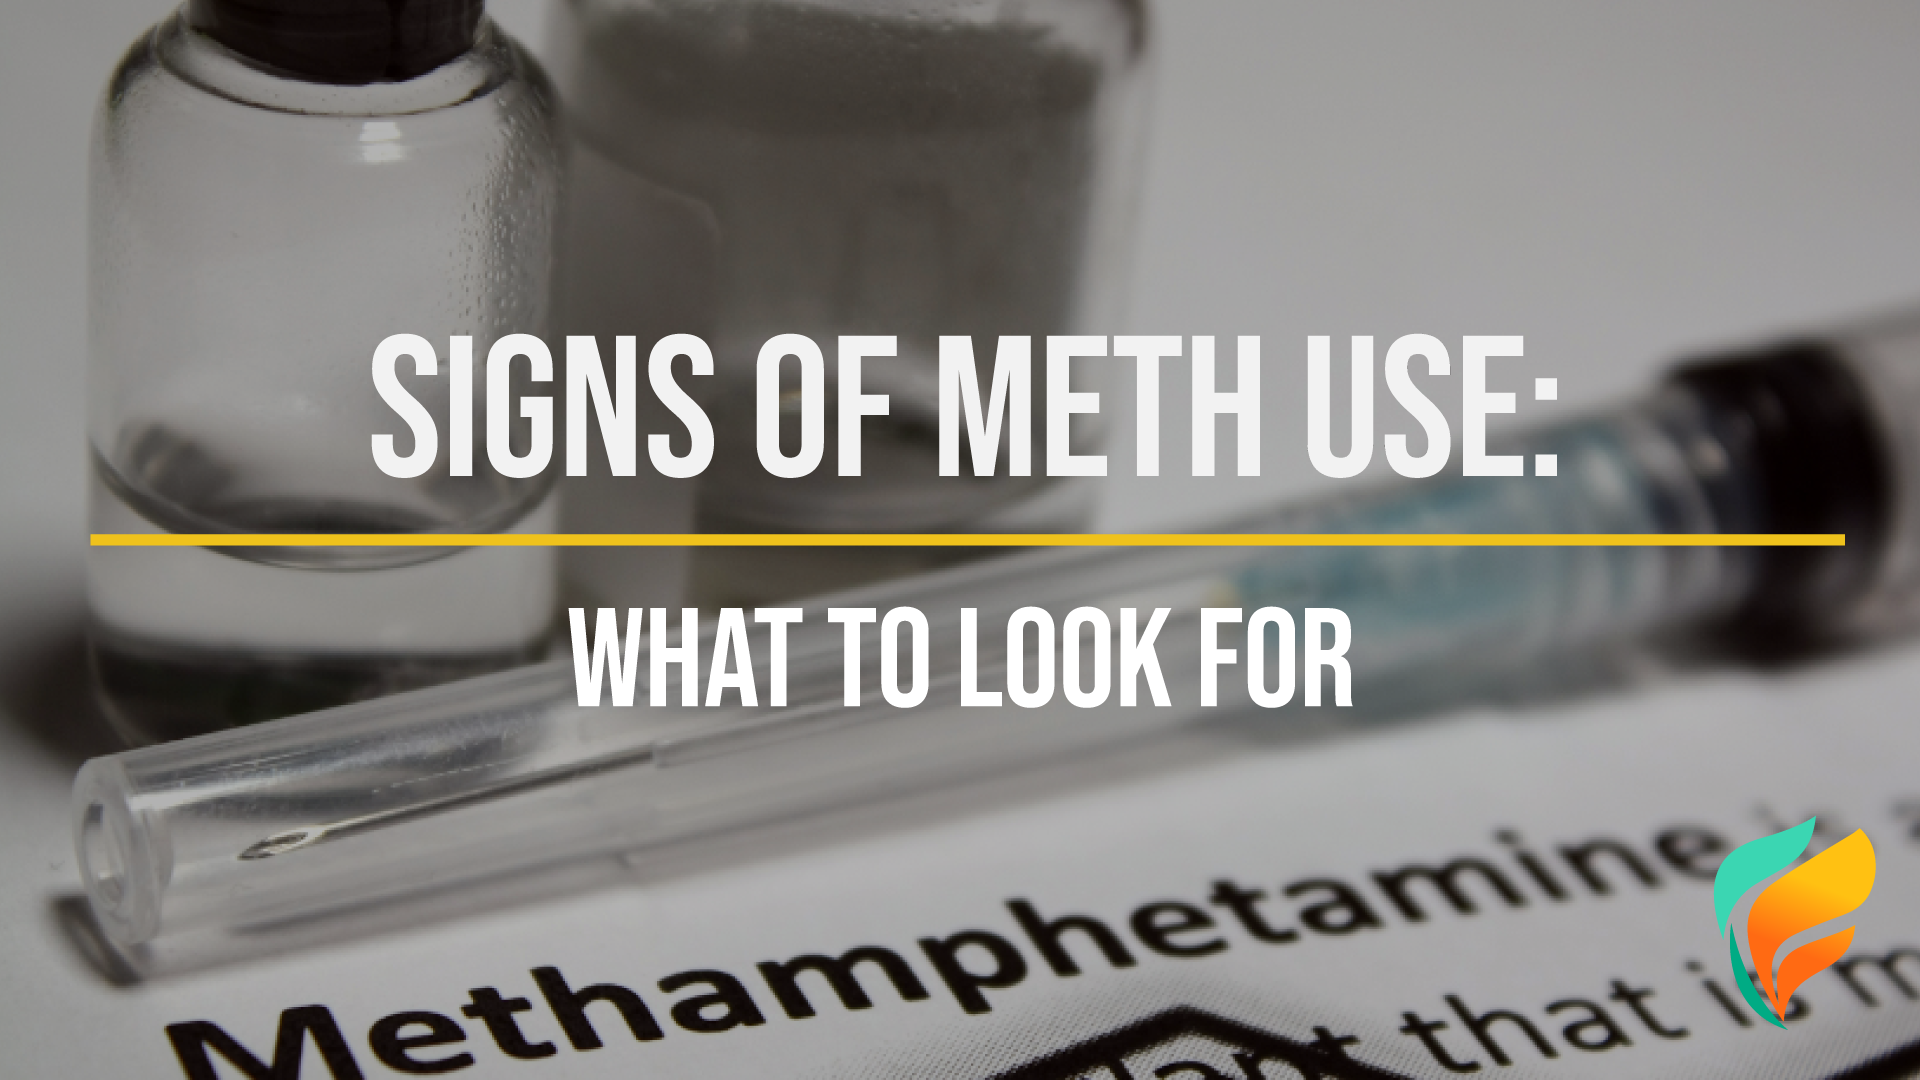 What are the signs of meth use?